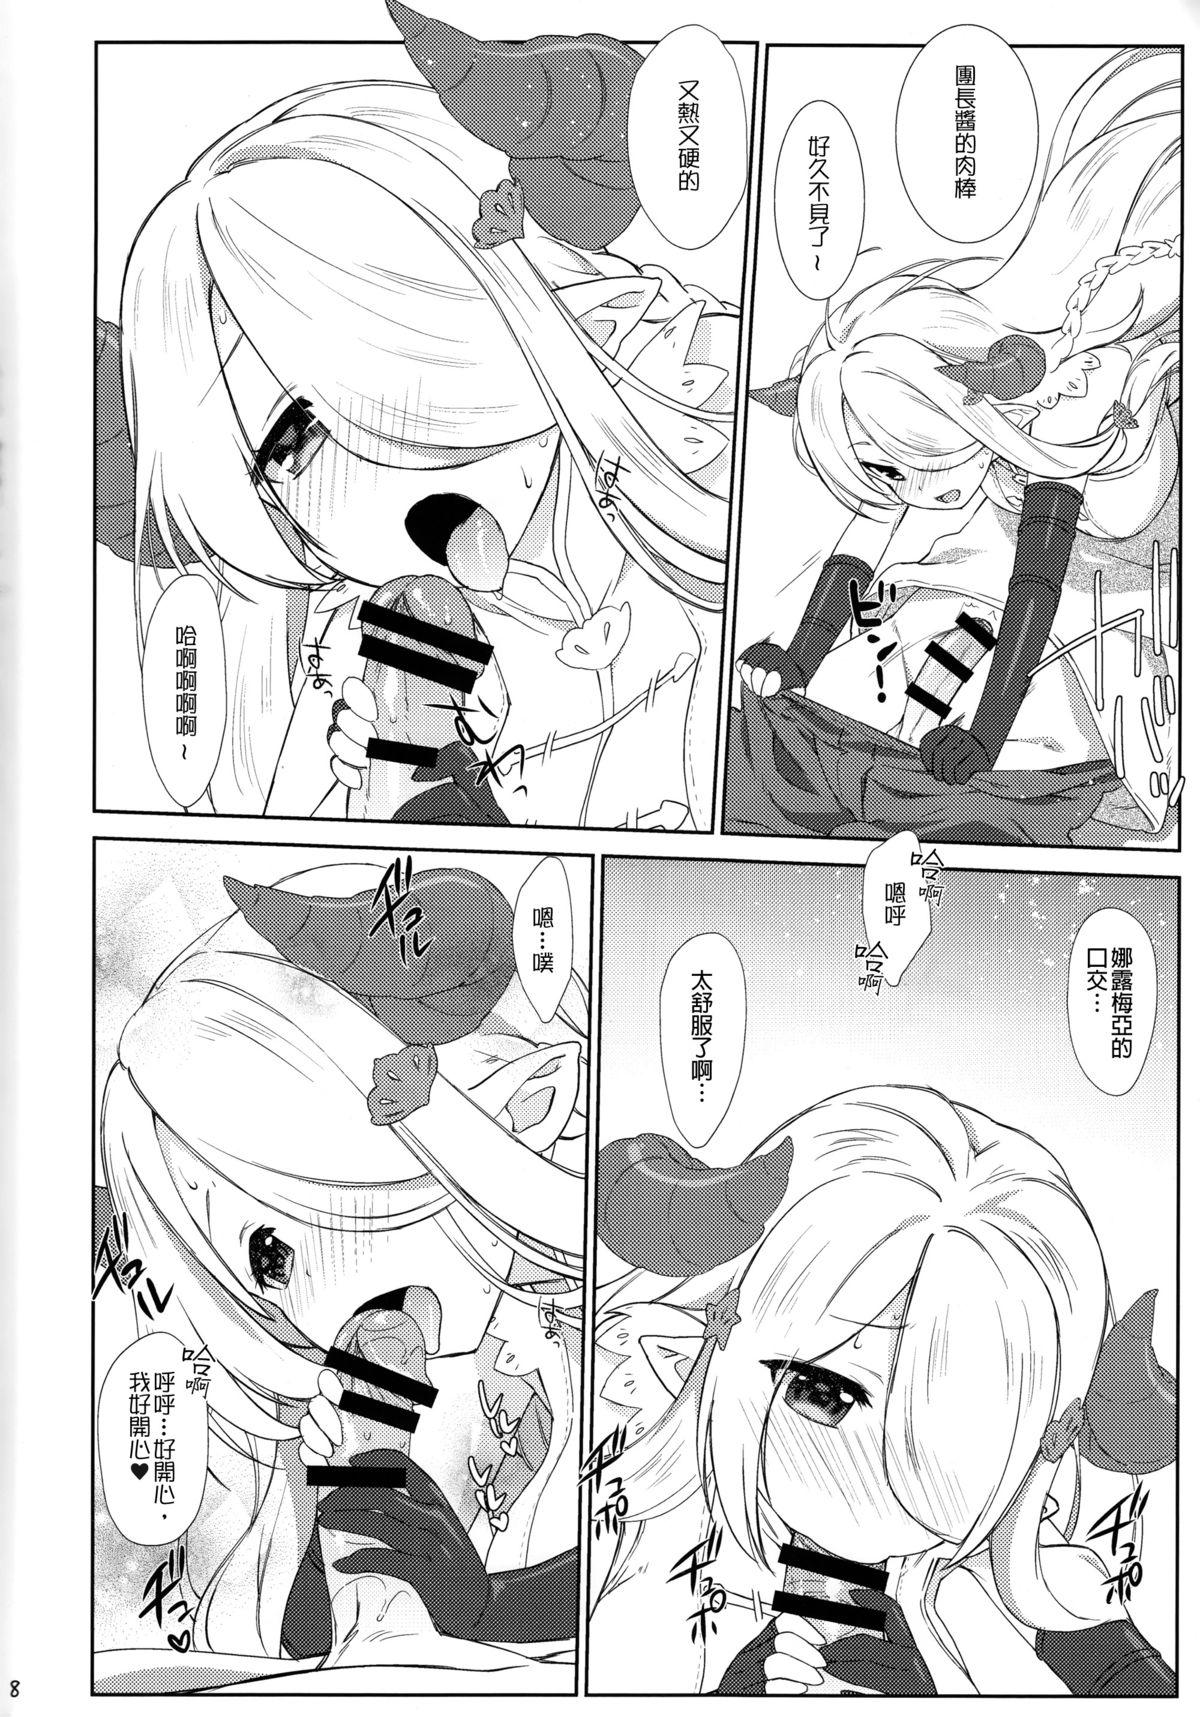 Moaning Melcheese 54 - Granblue fantasy Teenpussy - Page 8